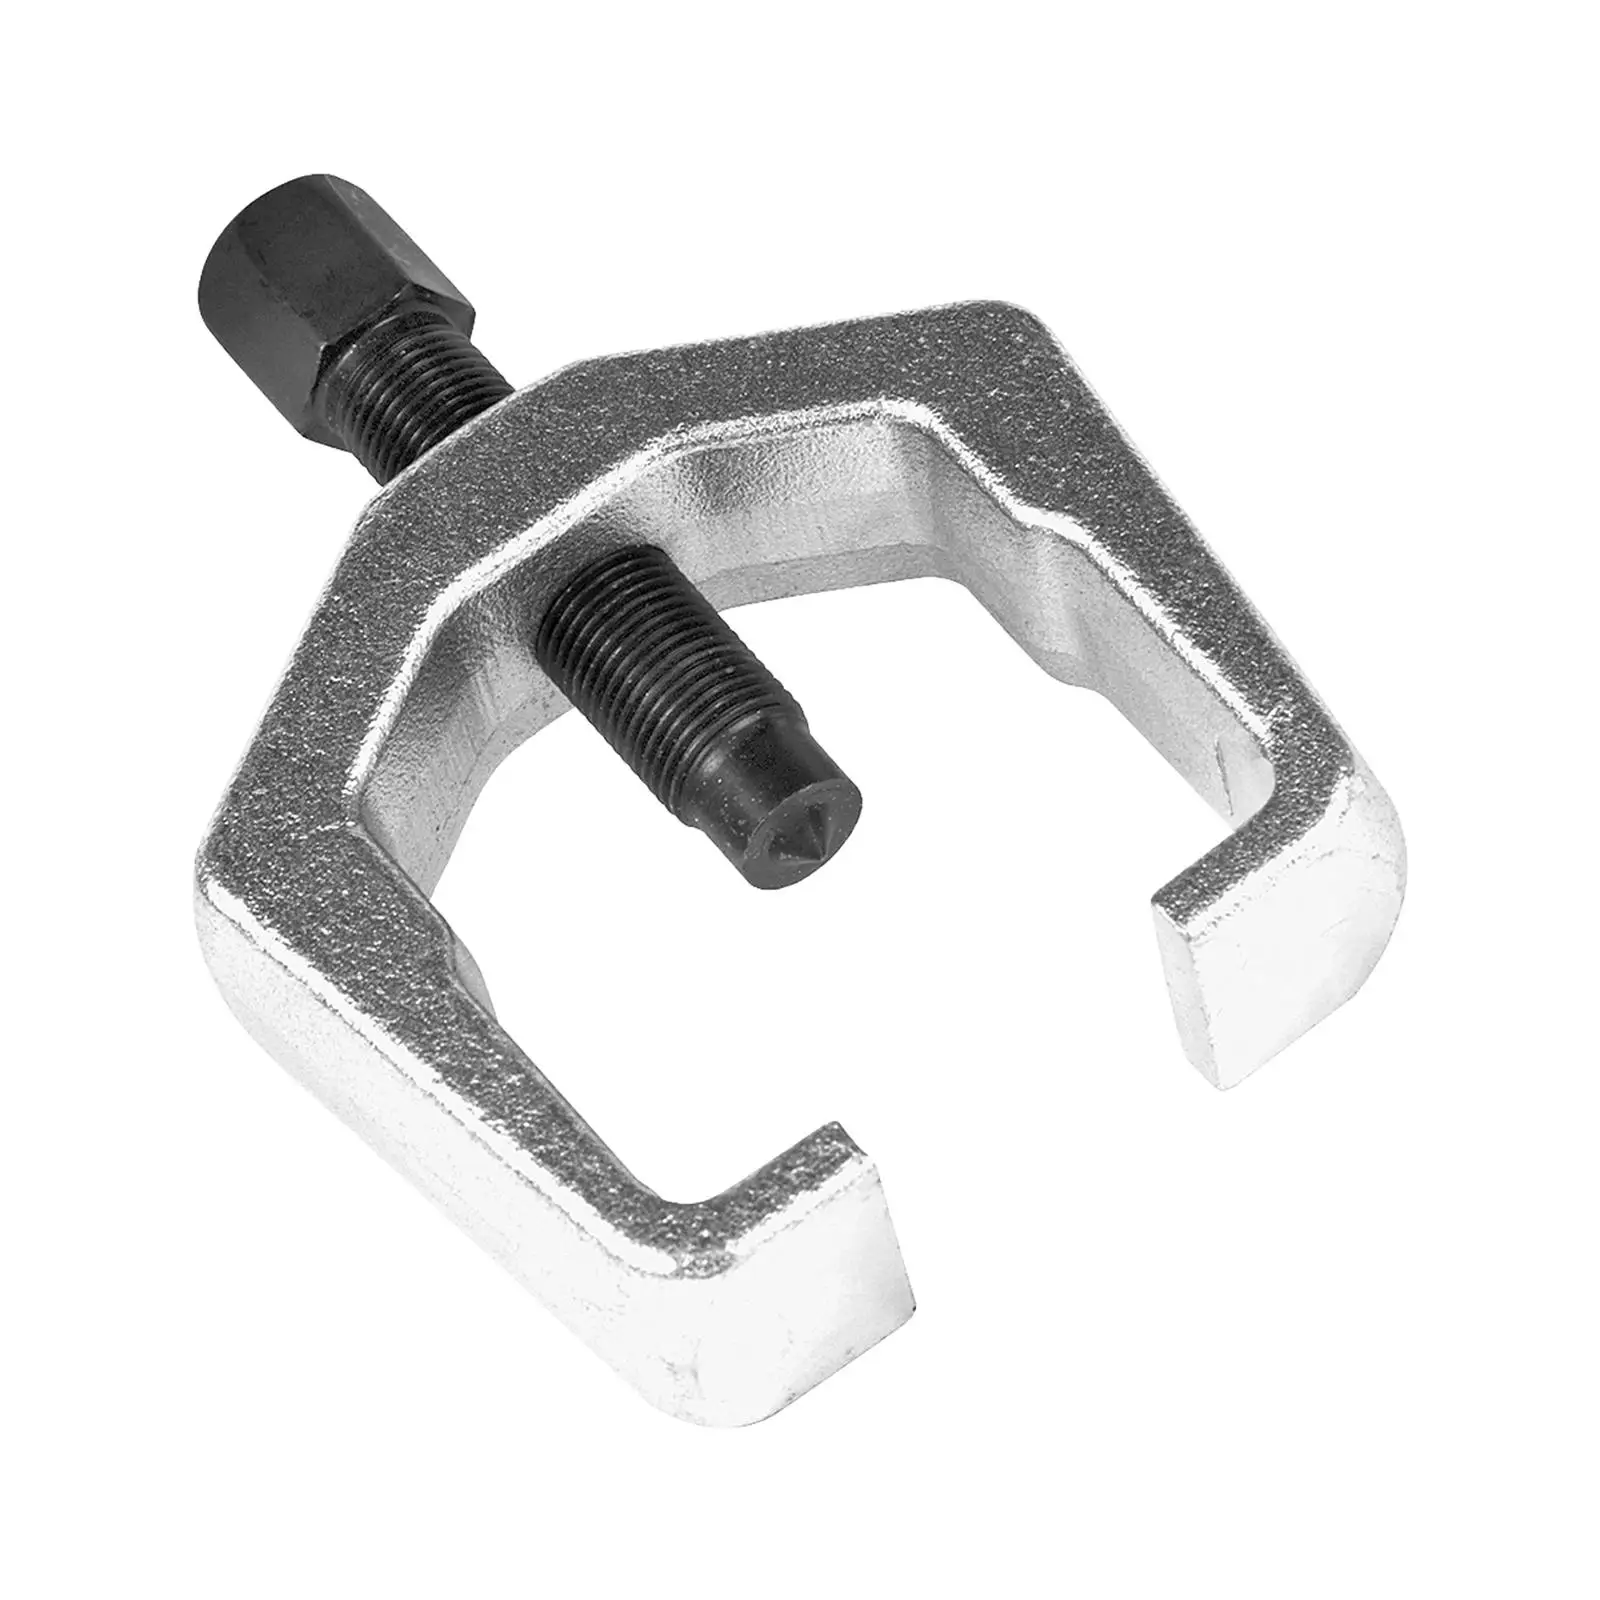 Slack Adjuster Puller Compact Iron Professional Remove Tool Removal Tool for Gears Easy to Operate Maintenance Tool Removal Tool